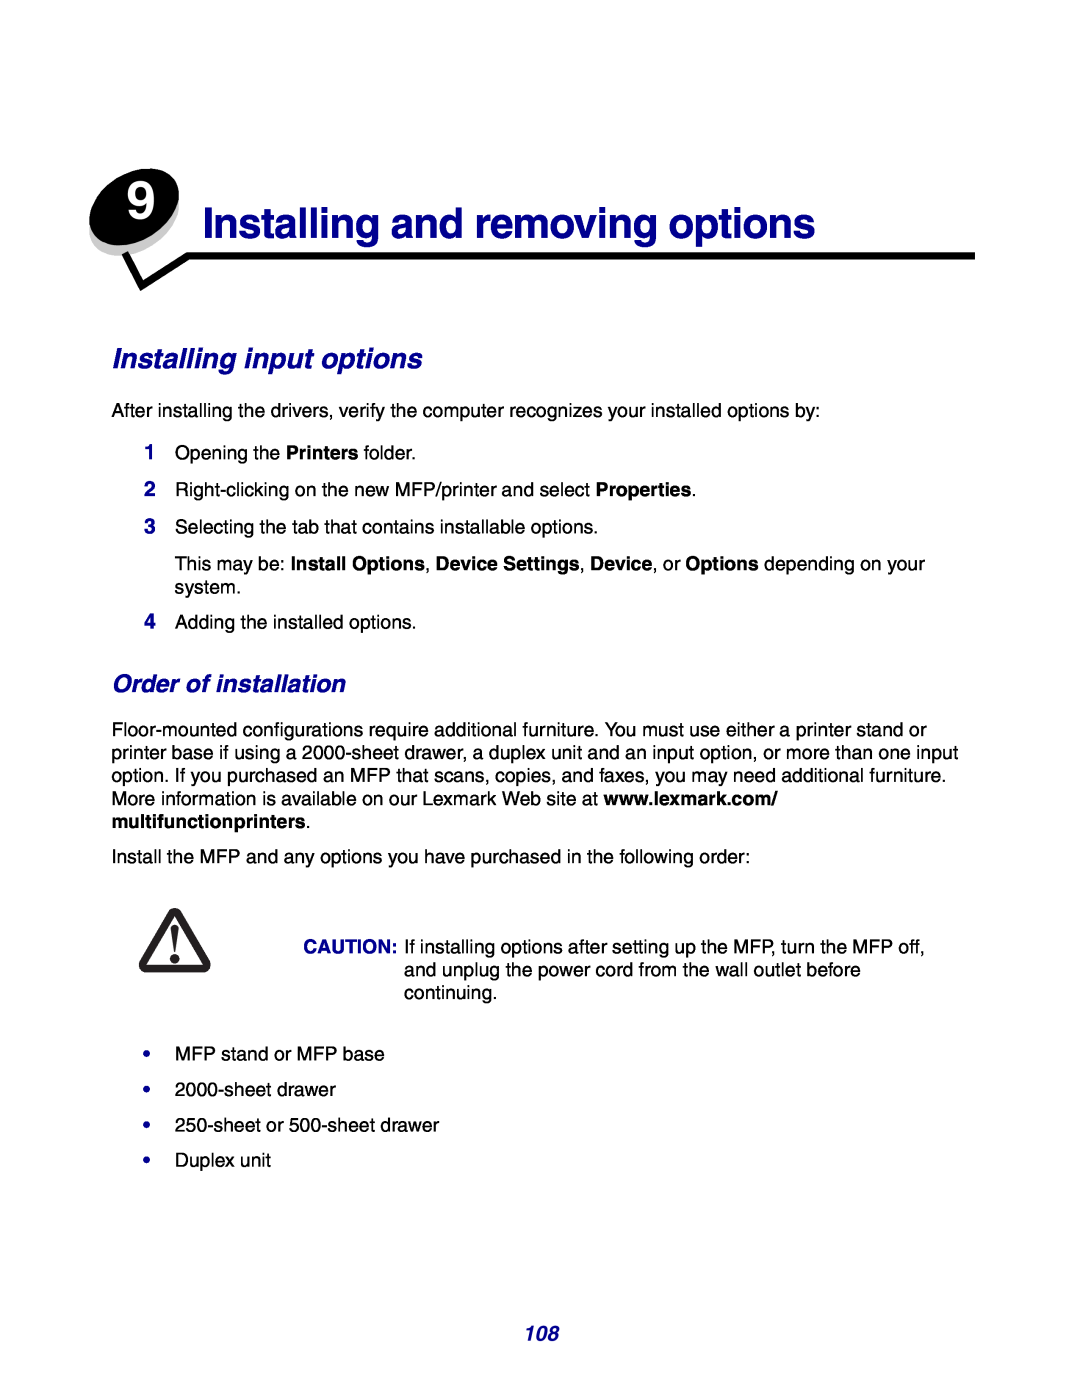 Lexmark X642e manual Installing and removing options, Installing input options, Order of installation 